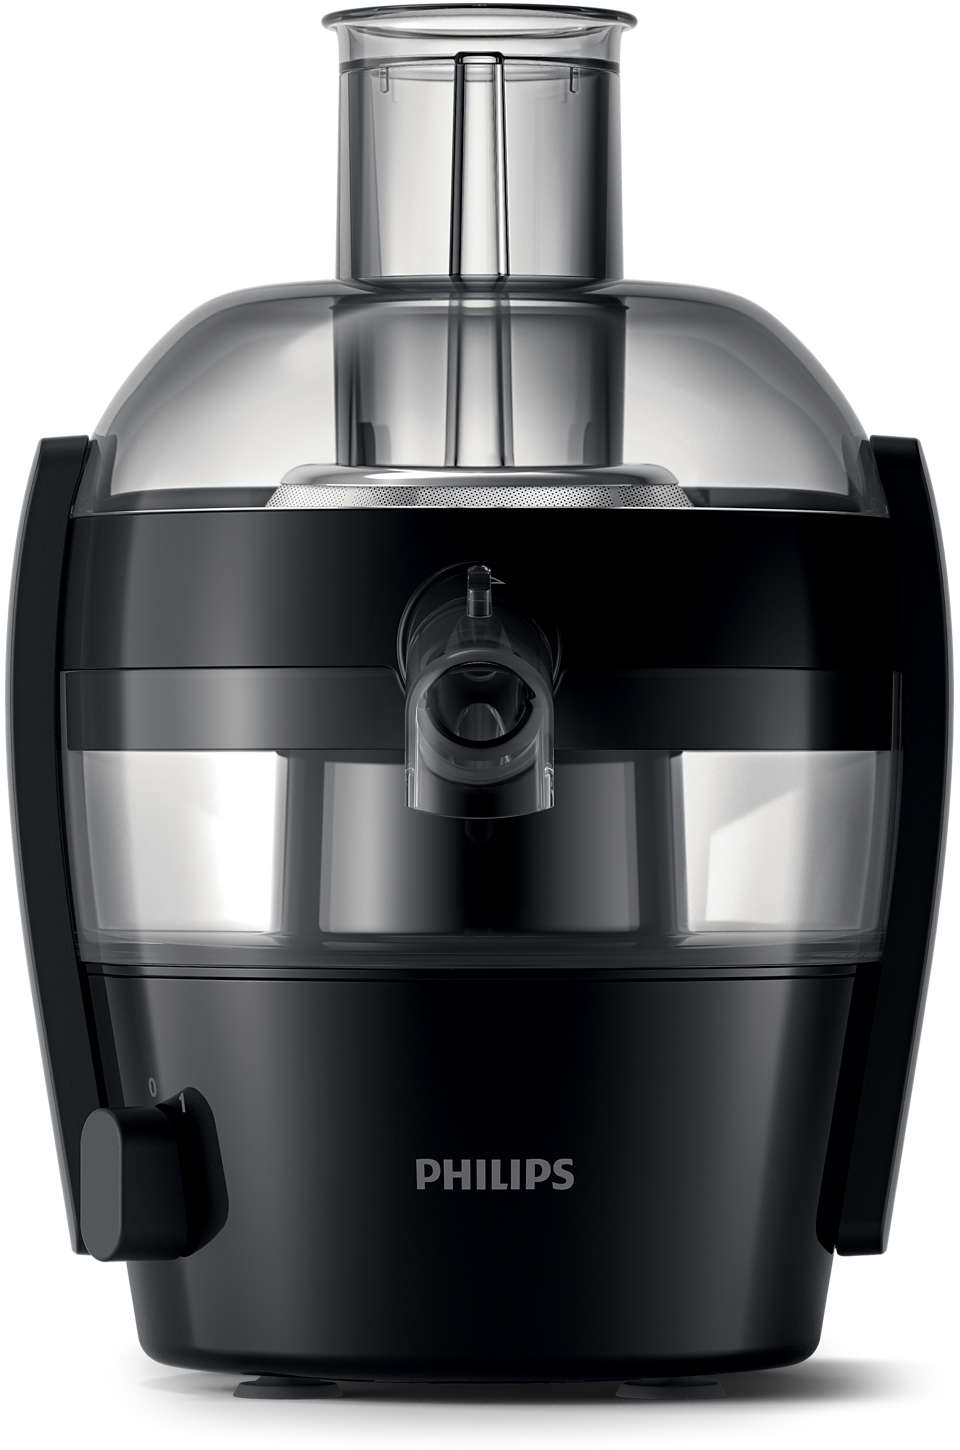 Philips - Juicer HR1832/00 - Viva Collection